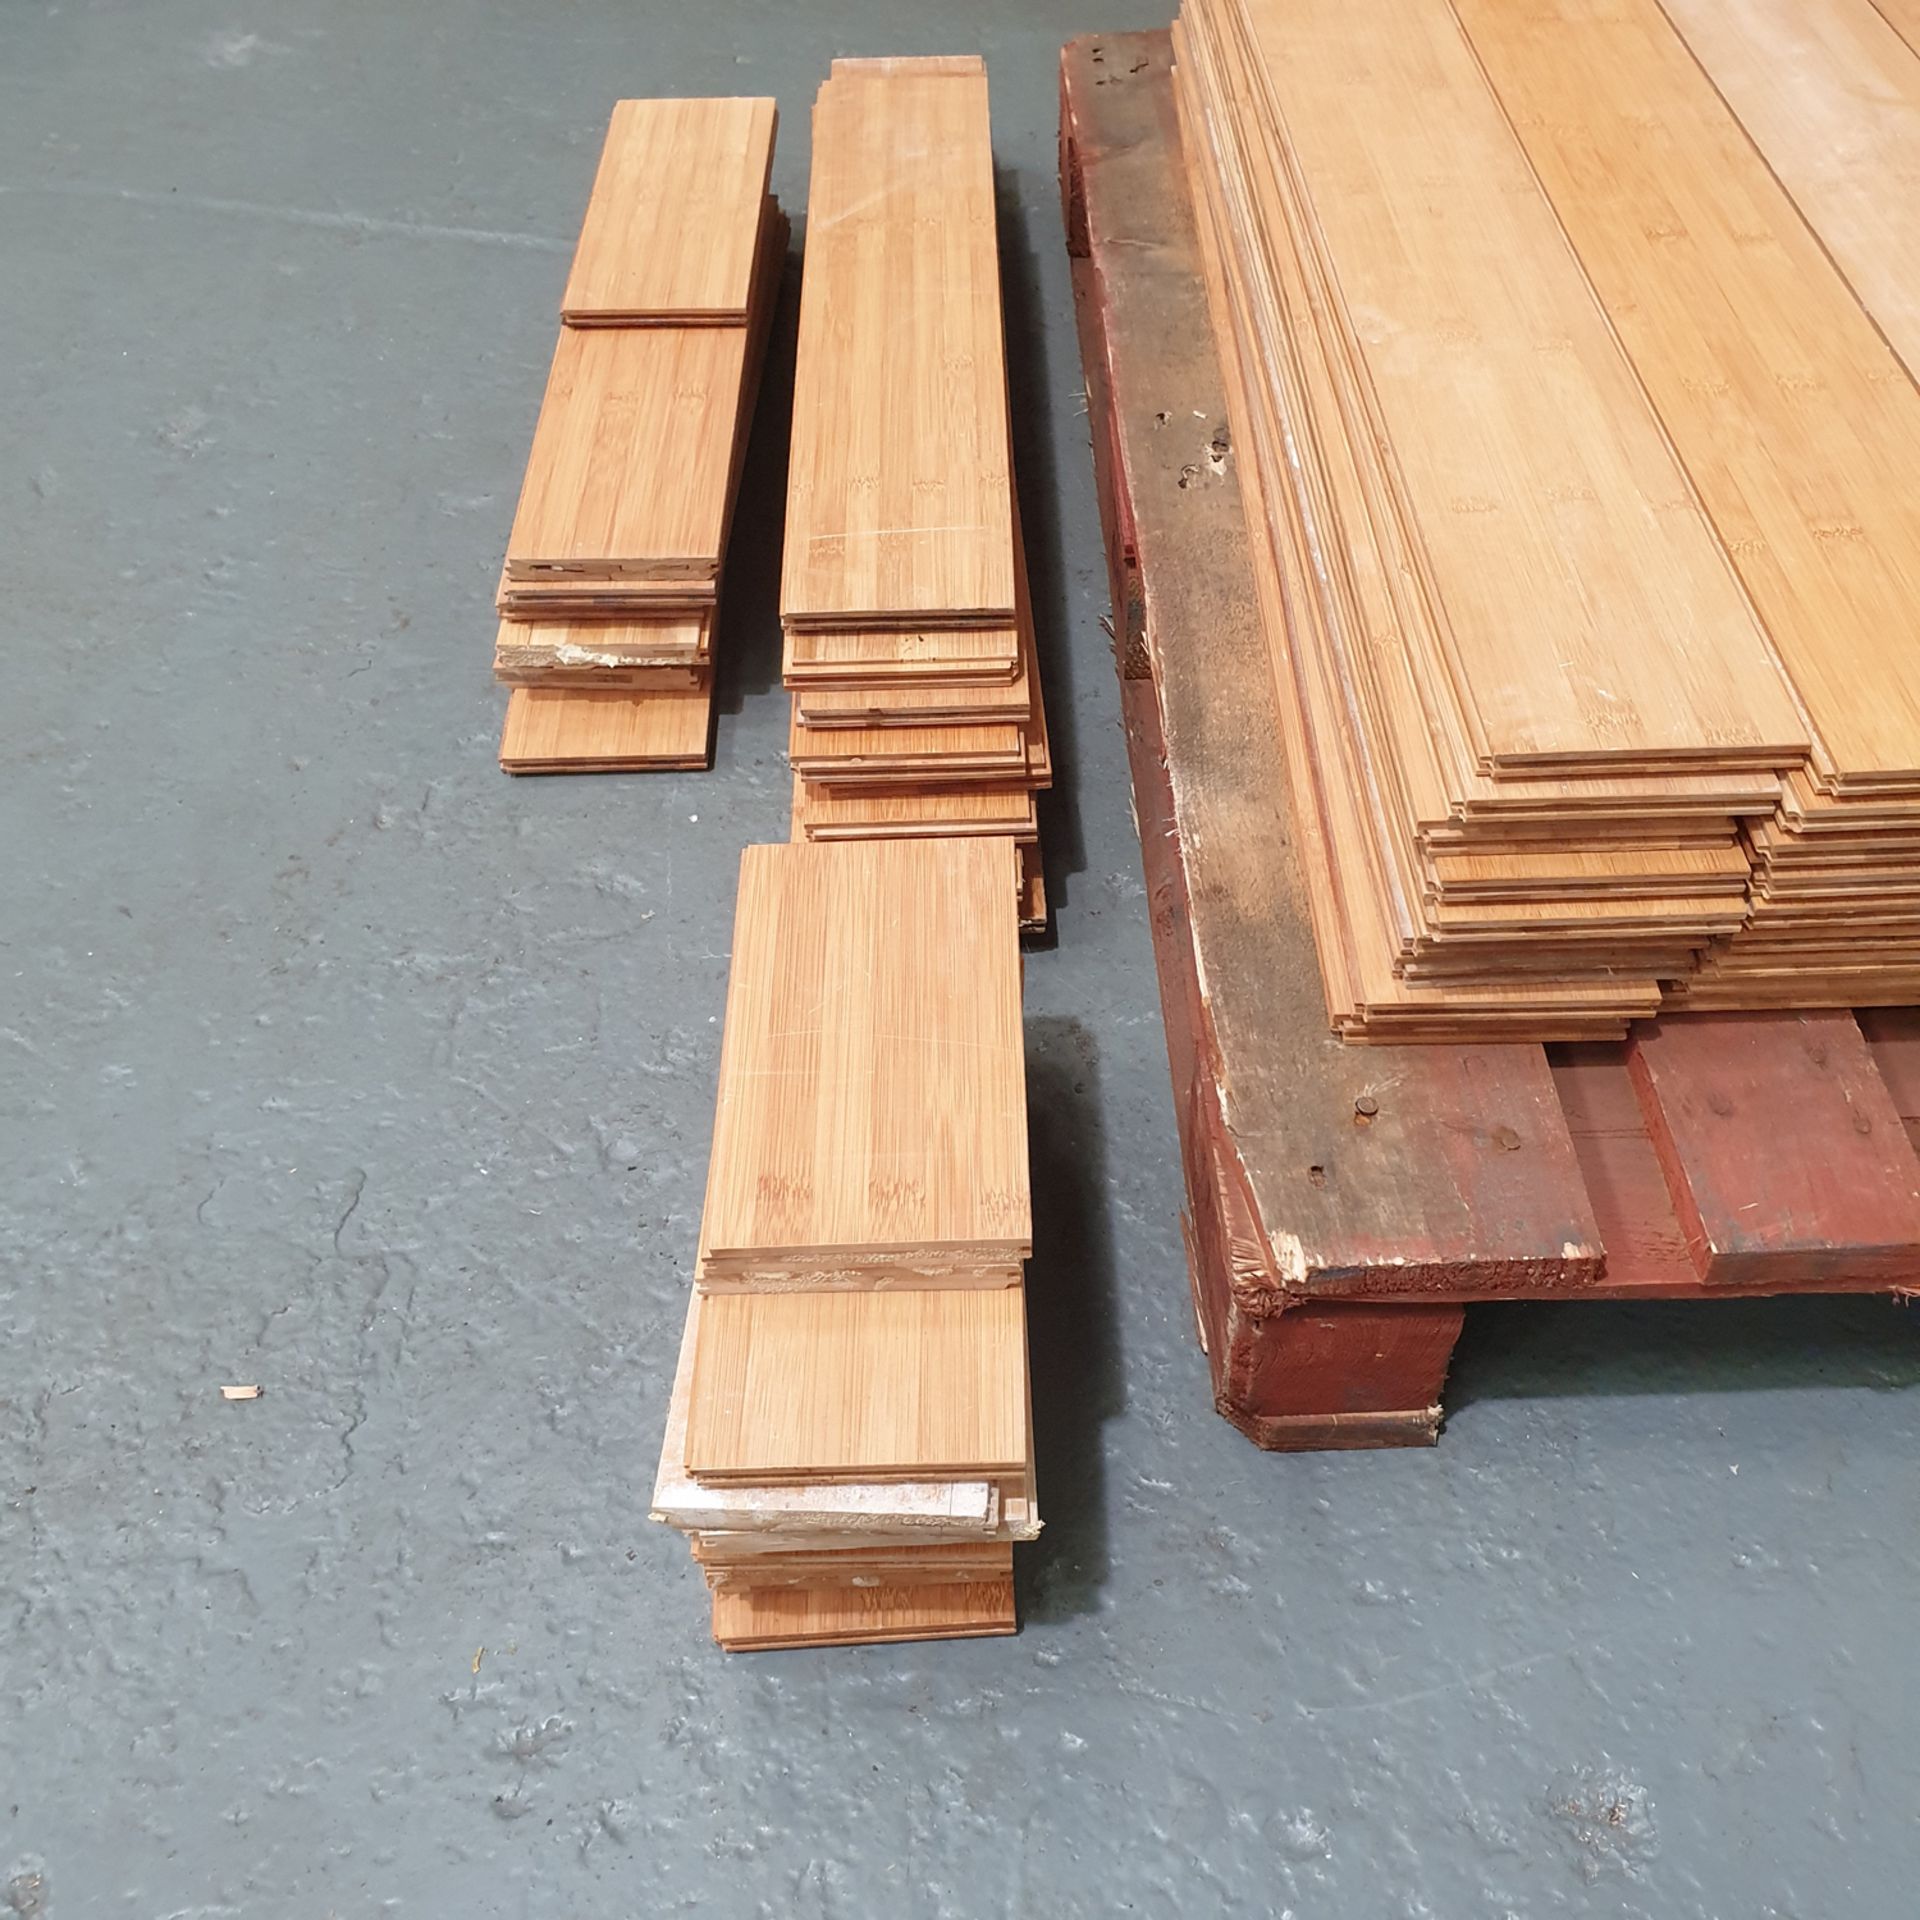 Hard Wood Flooring (Ply) With Additional Off Cuts. Approx 5 Square Meters. - Image 5 of 5